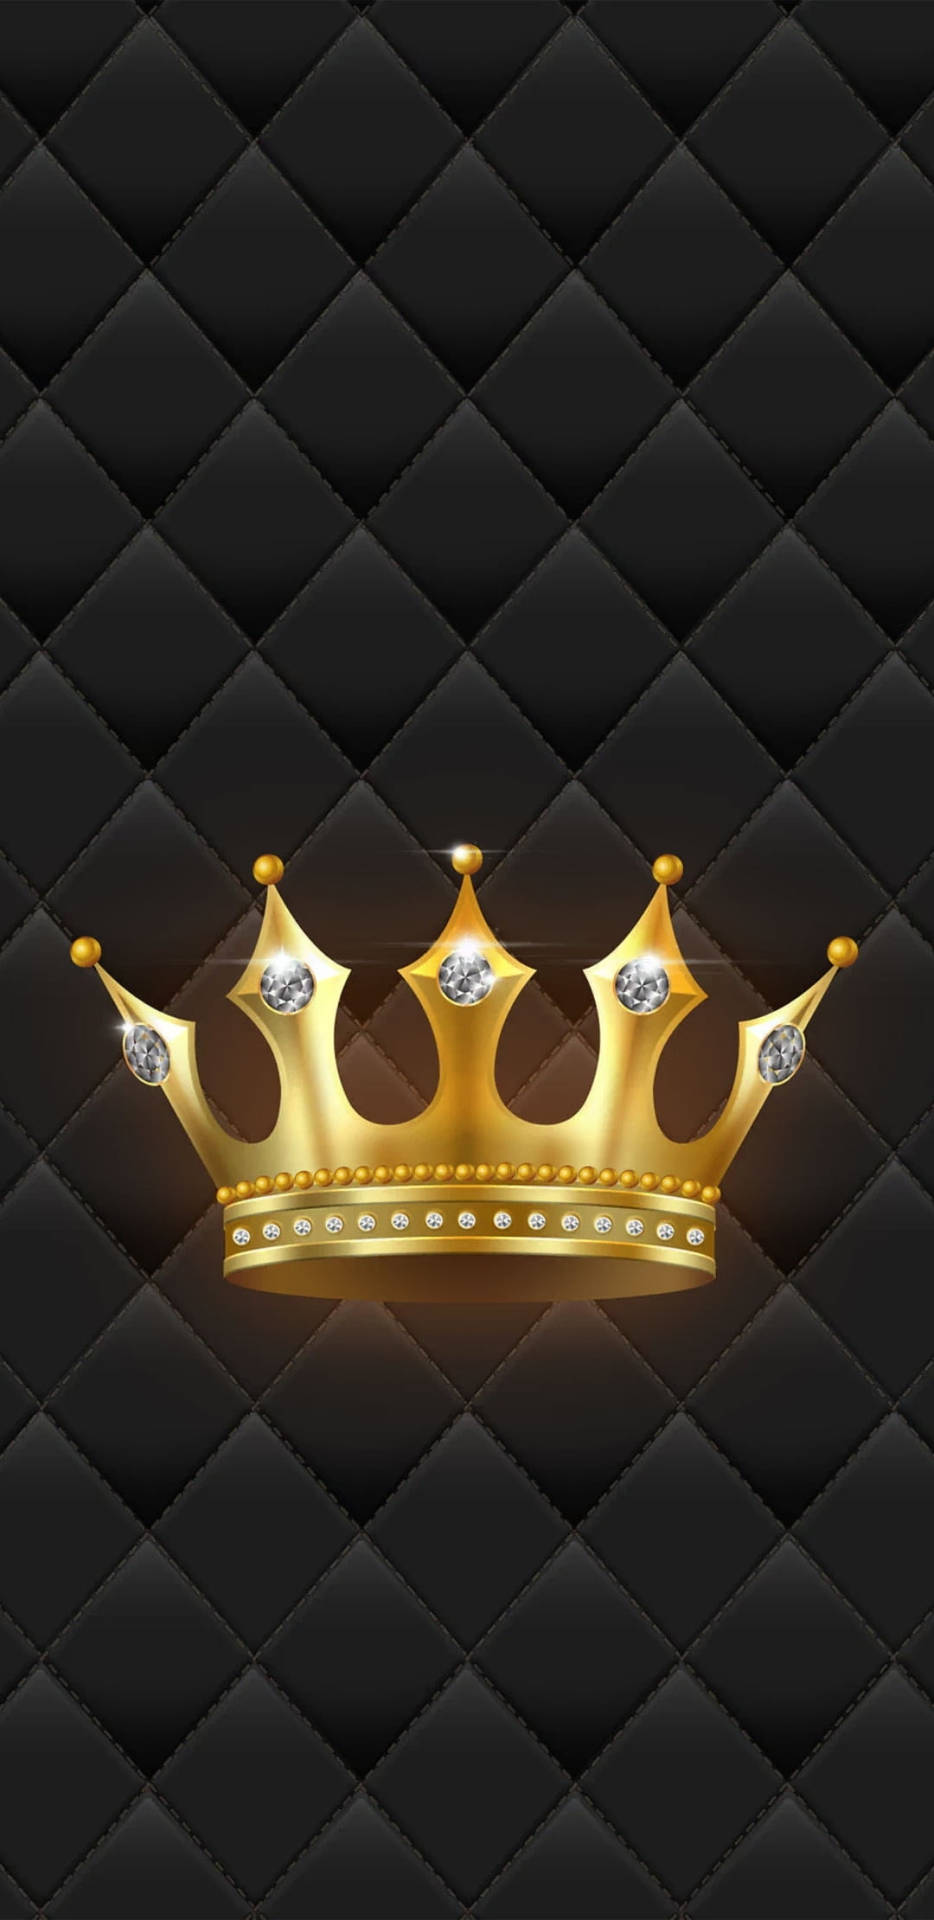 Gold Crown Quilted Queen Girly Background